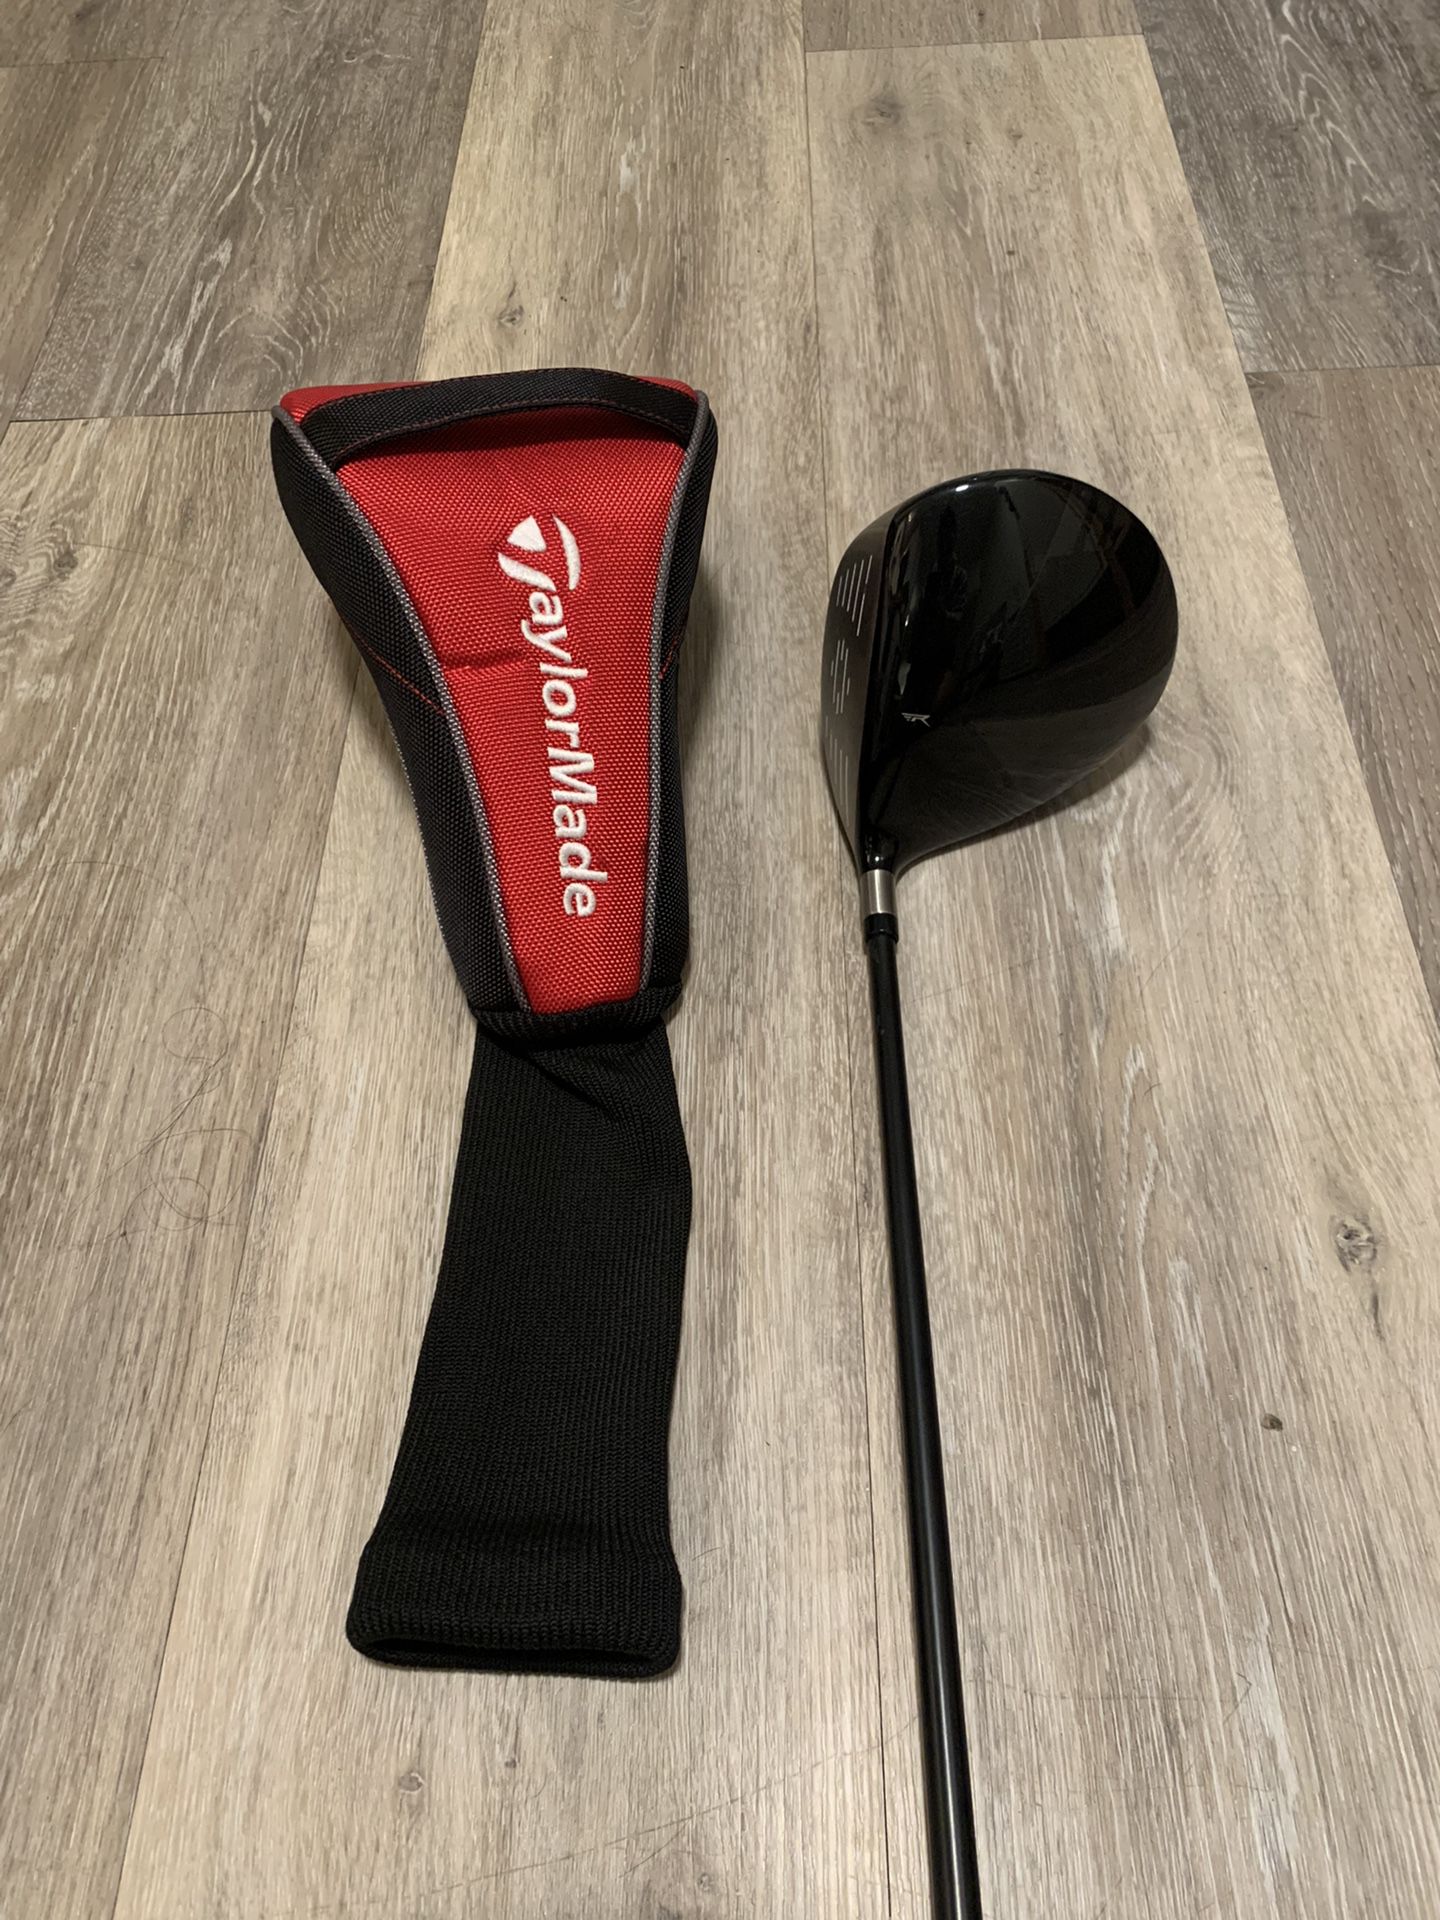 Taylormade RBZ Pro Driver